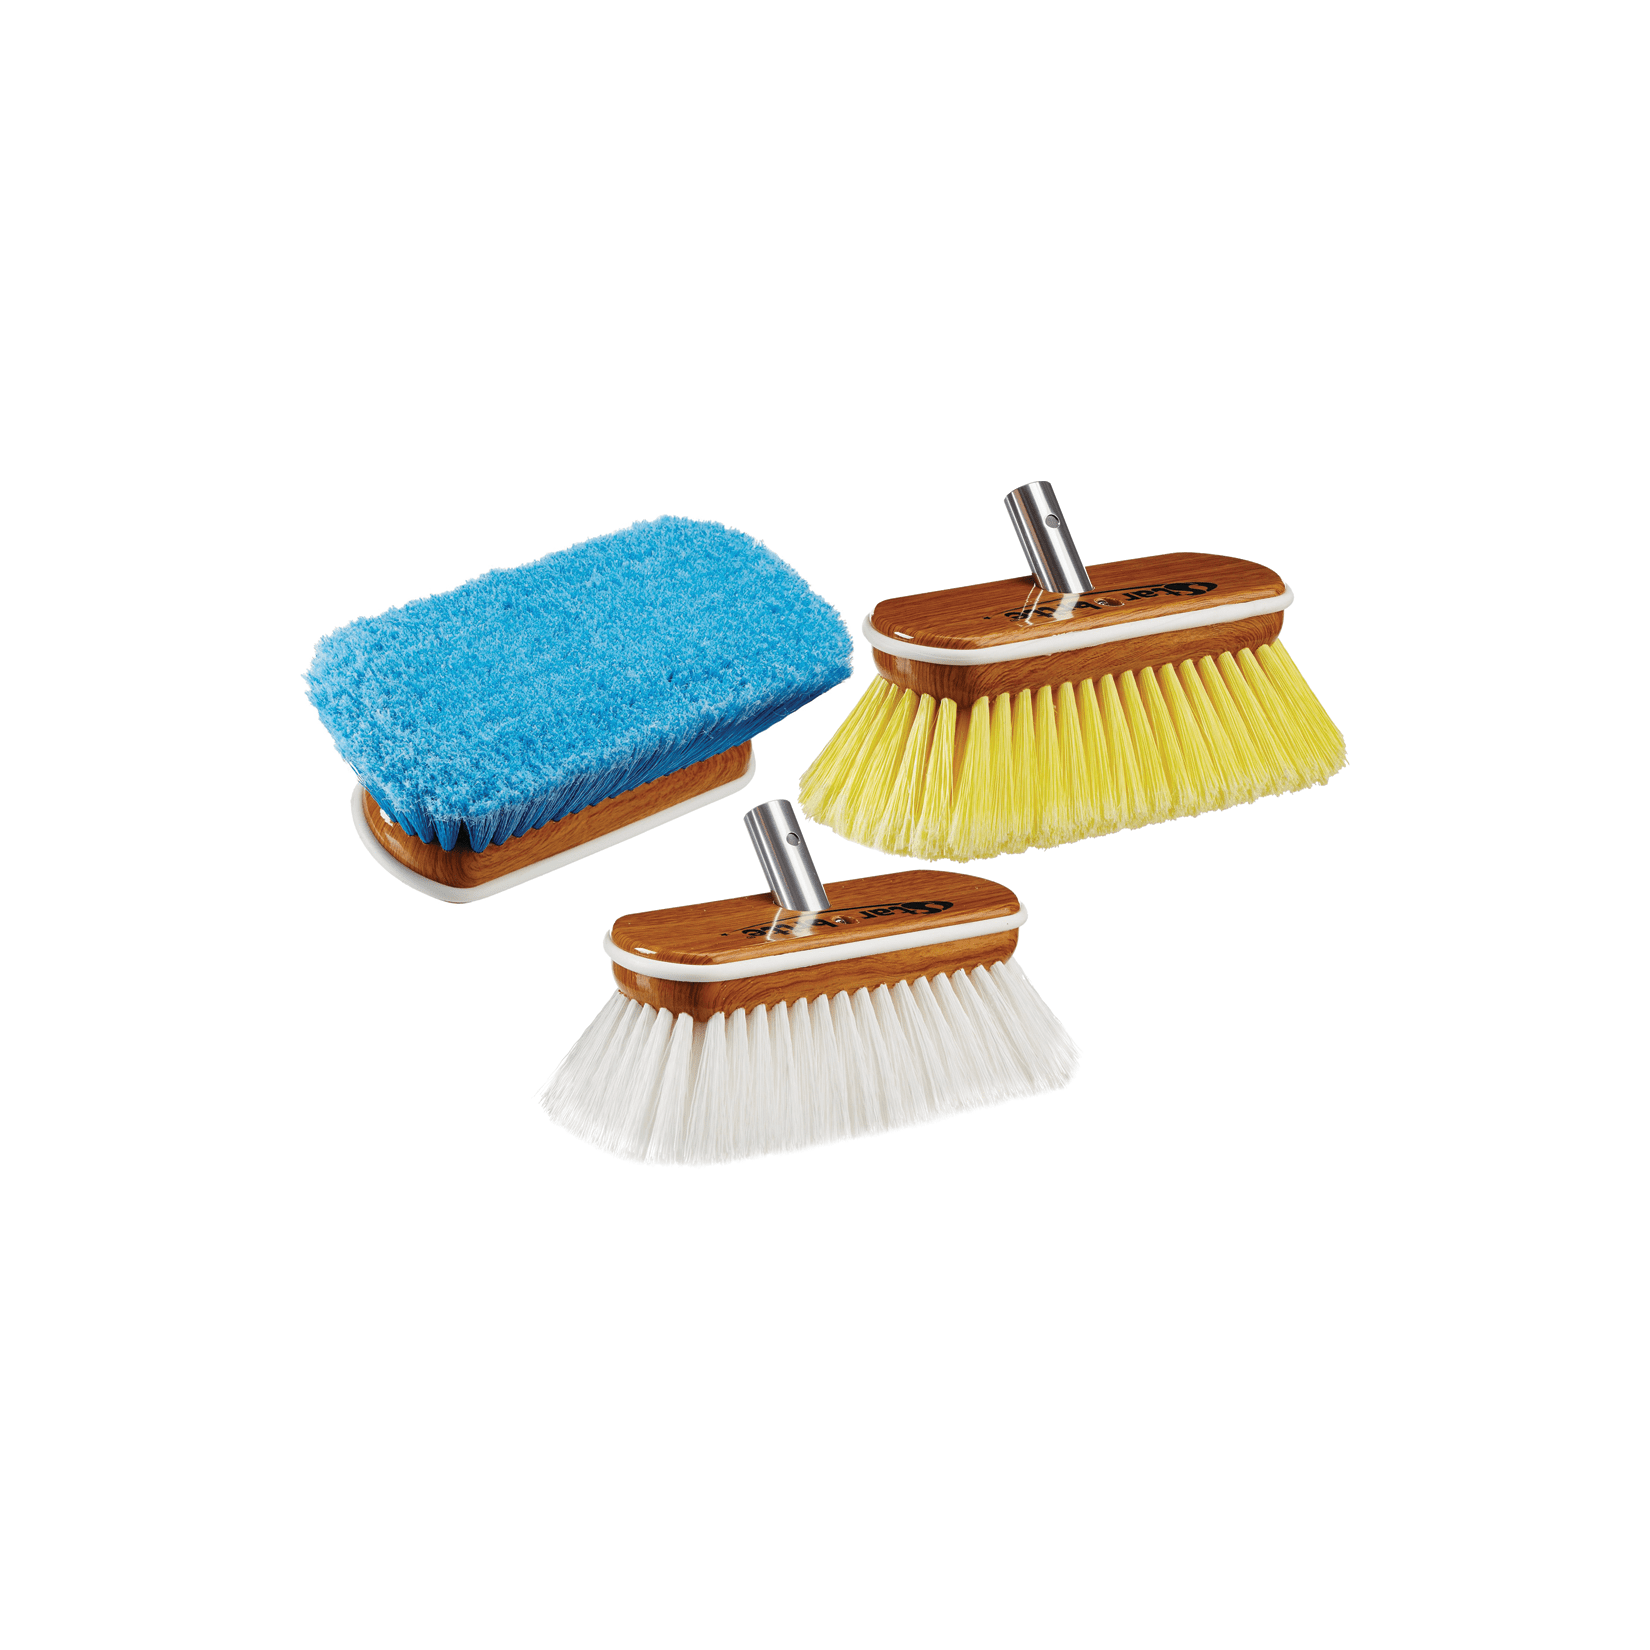 https://image.fisheriessupply.com/c_lpad,dpr_3.0,w_550,h_550,d_imageComingSoon-tiff/f_auto,q_auto/v1/static-images/starbrite-8in-deluxe-wood-block-wash-brushes-rubber-bumper-group